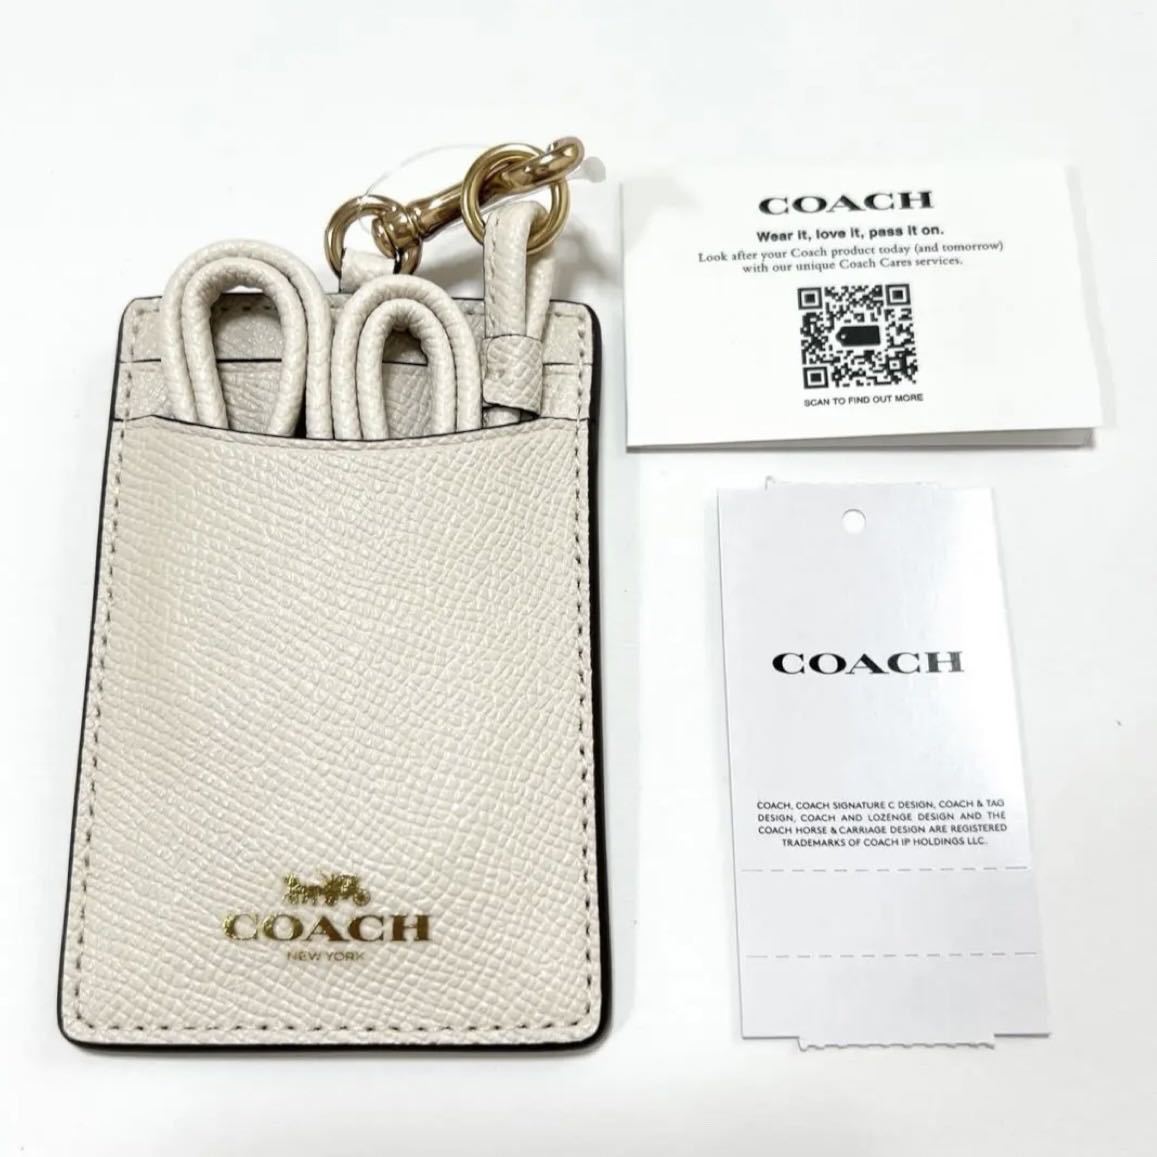 COACH ID case Ran yard leather eggshell white Coach light khaki multi strap card-case pass case ticket holder company member proof student proof 